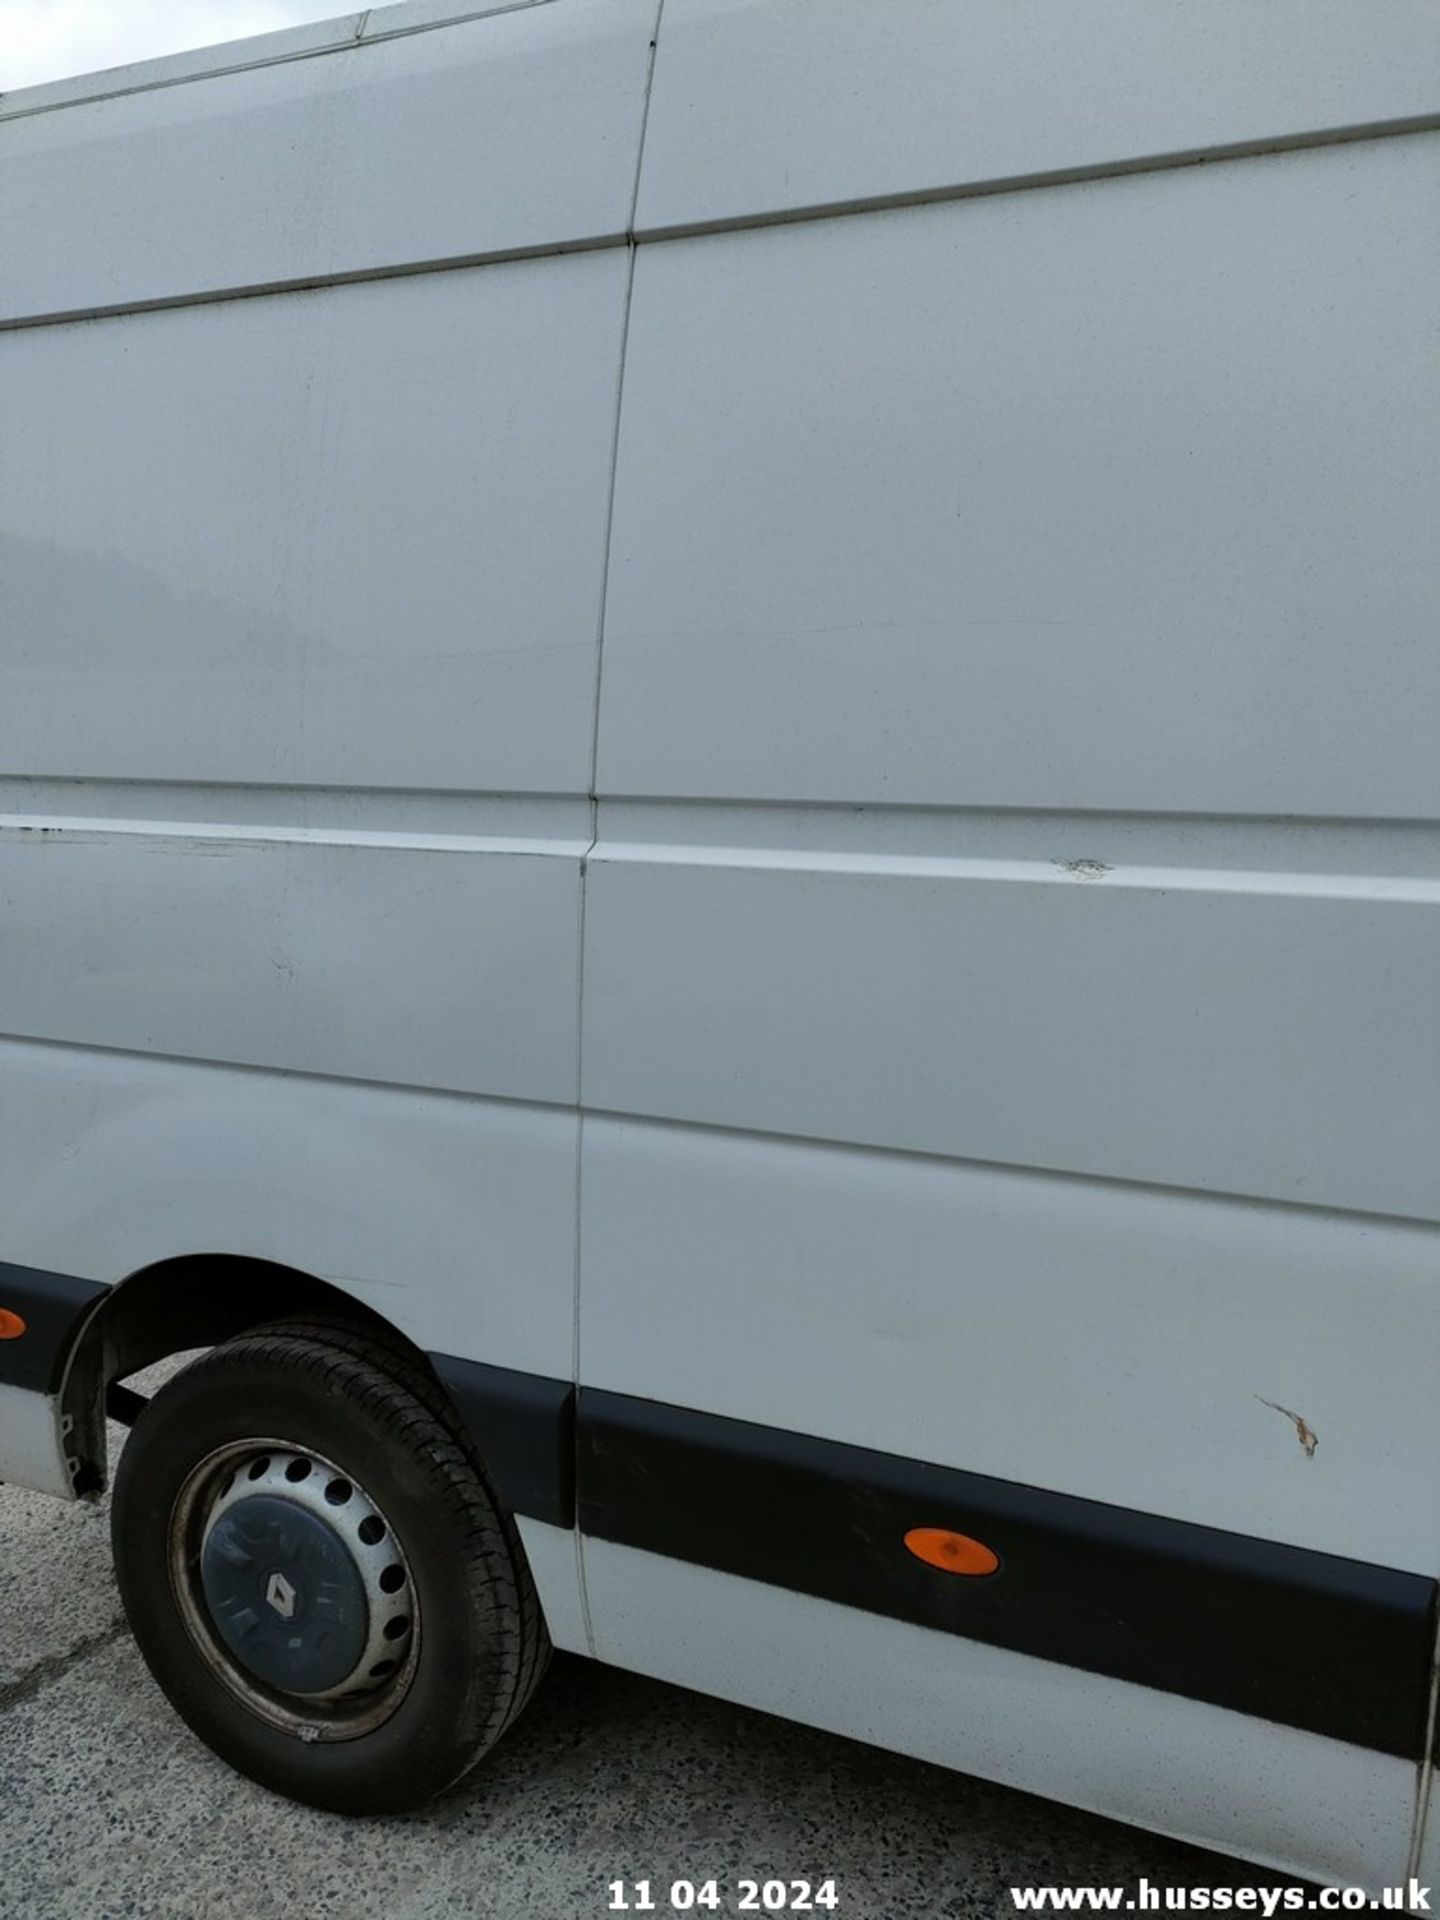 18/68 RENAULT MASTER LM35 BUSINESS DCI - 2298cc 5dr Van (White) - Image 52 of 68